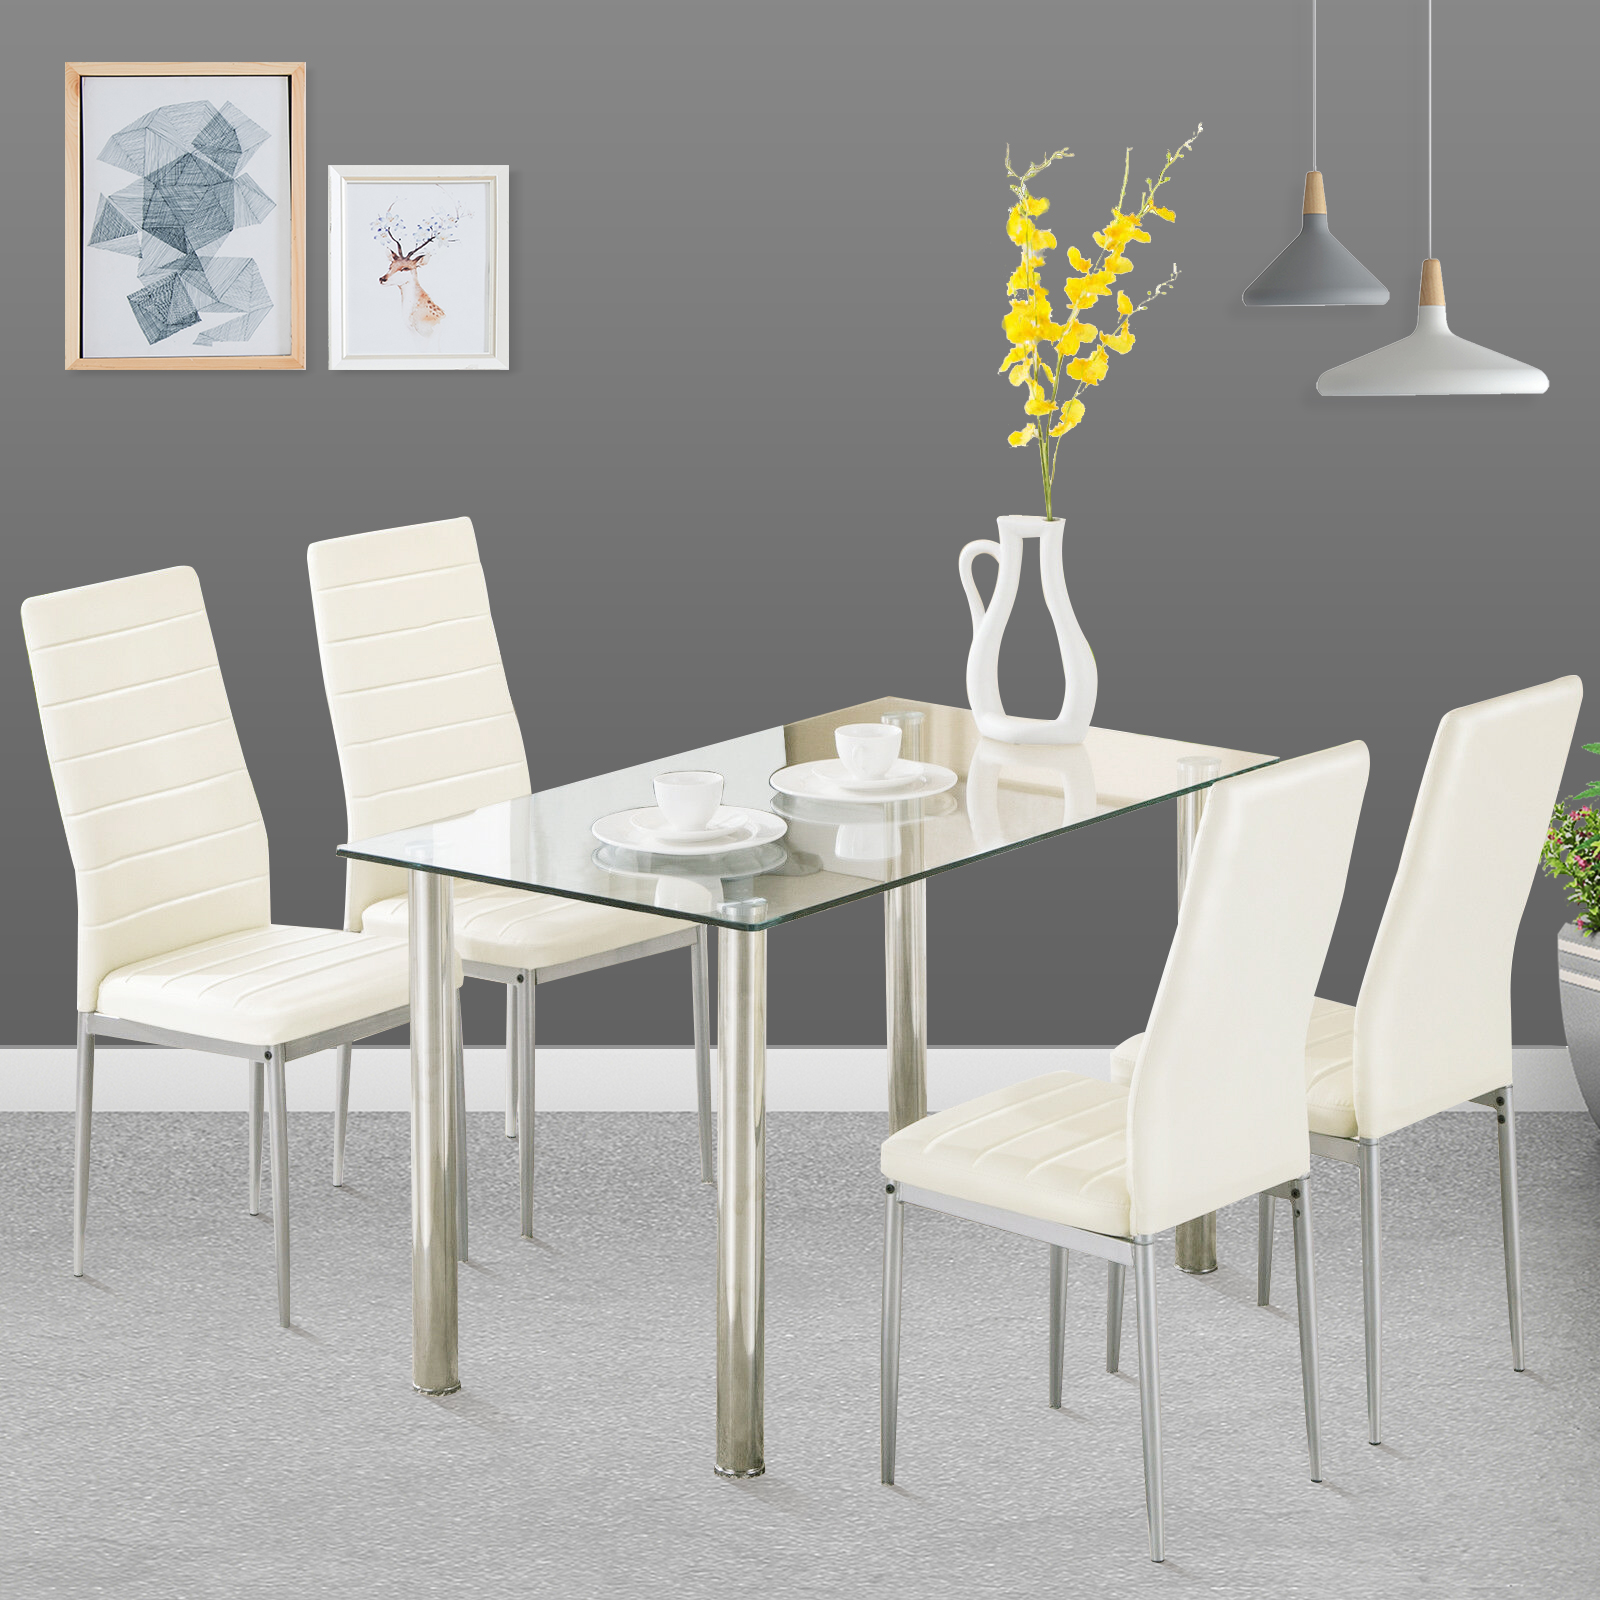 Buy Mecor 5 Piece Dining Table Set Tempered Glass Top Dinette Sets With 4 Pu Leather Chairs For Dining Room Kitchen Furniture Breakfast